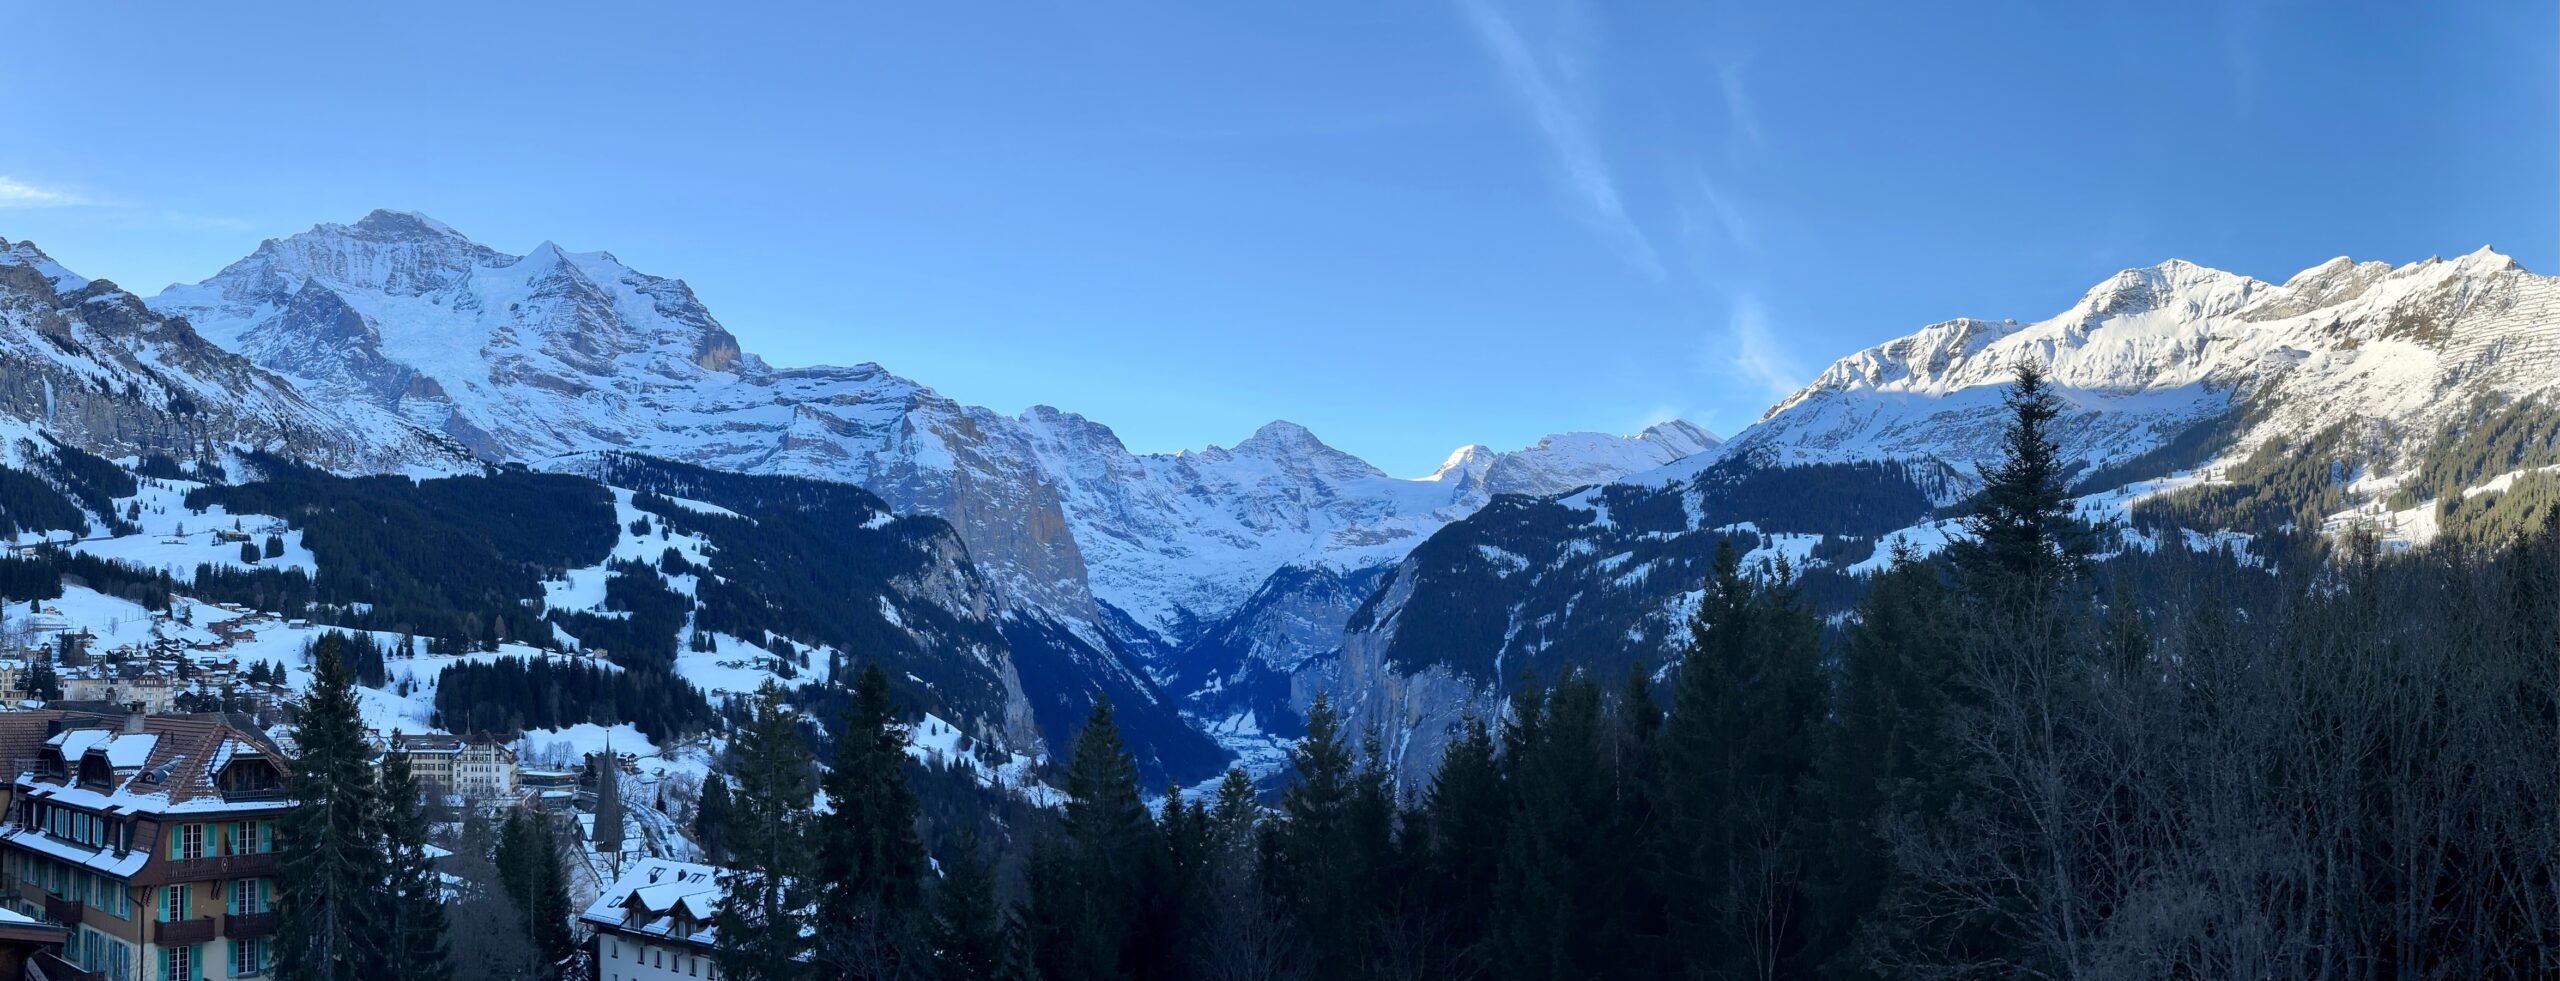 Fir trees, snow-covered buildings, snow-capped peaks under a blue sky.